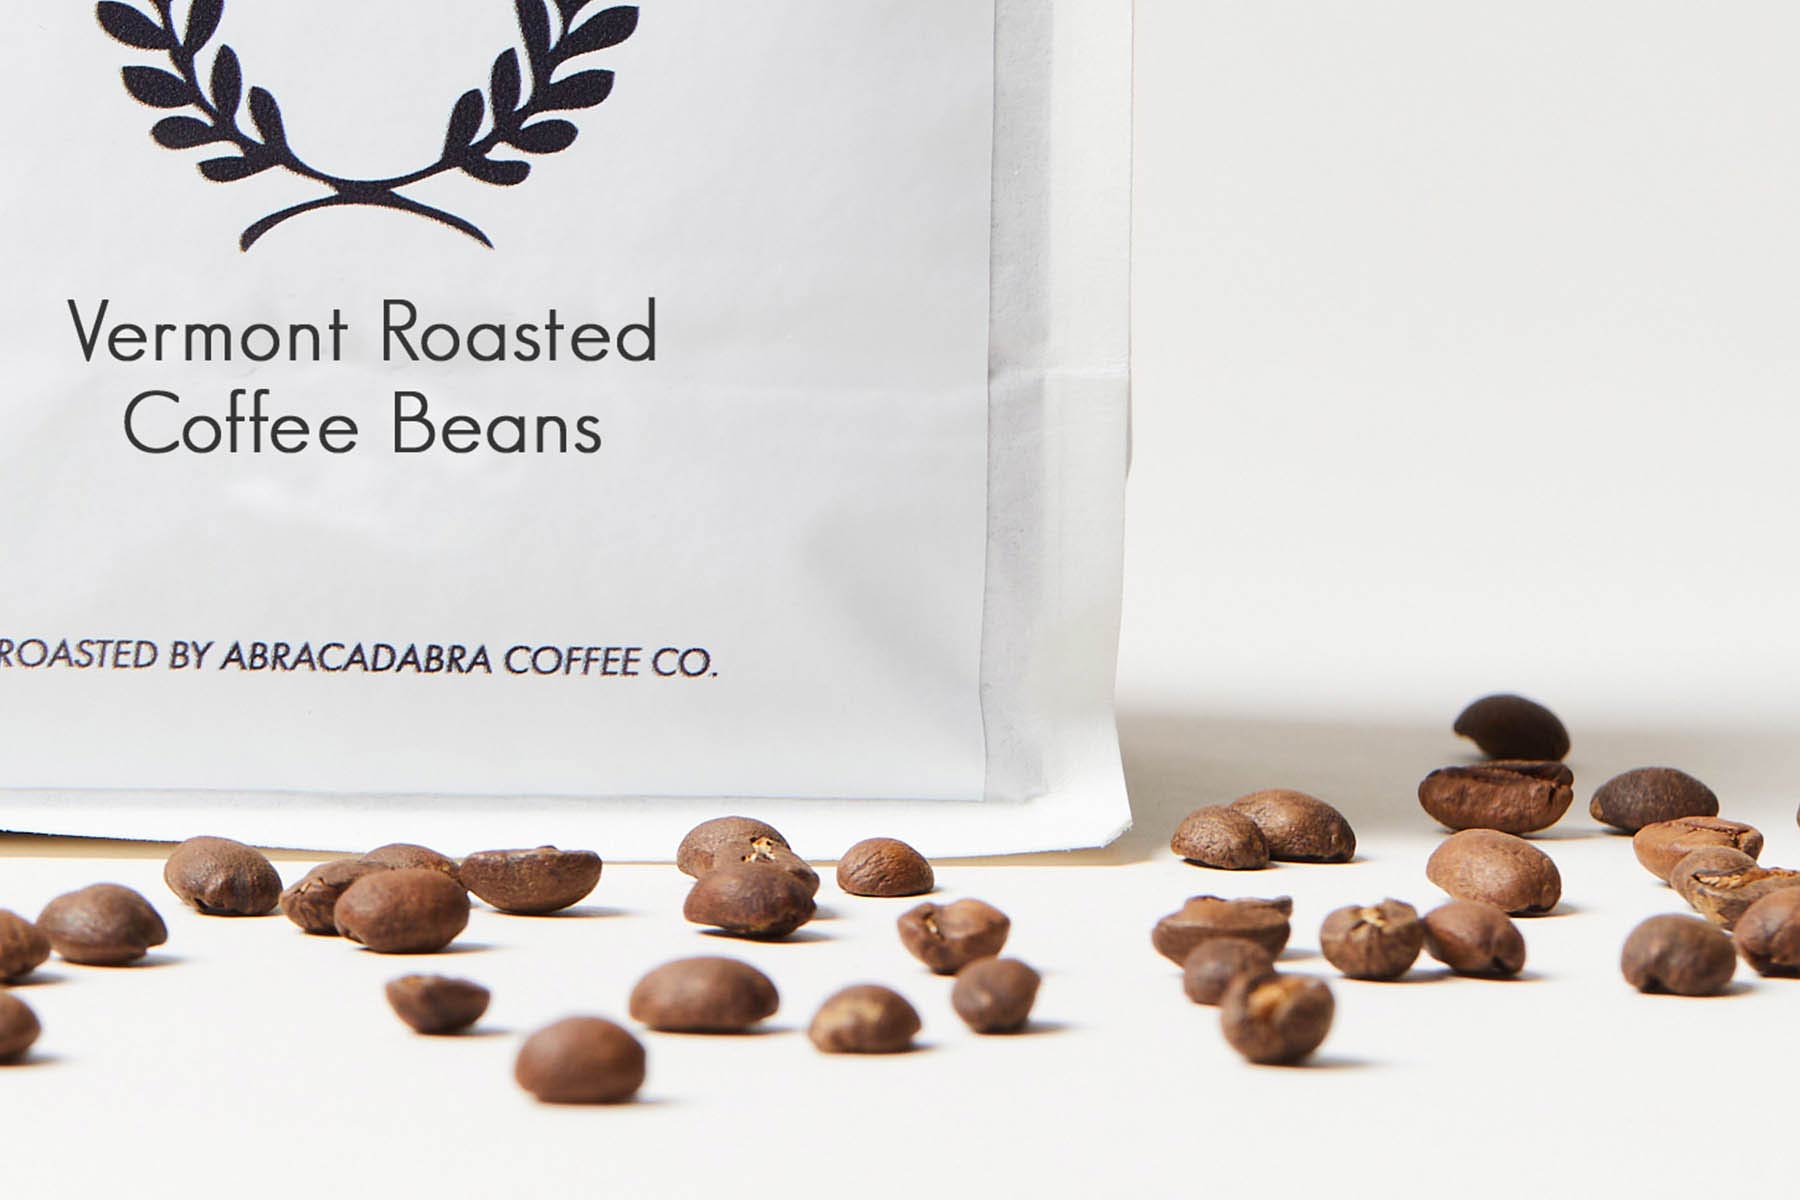 Vermont Roasted Coffee Beans